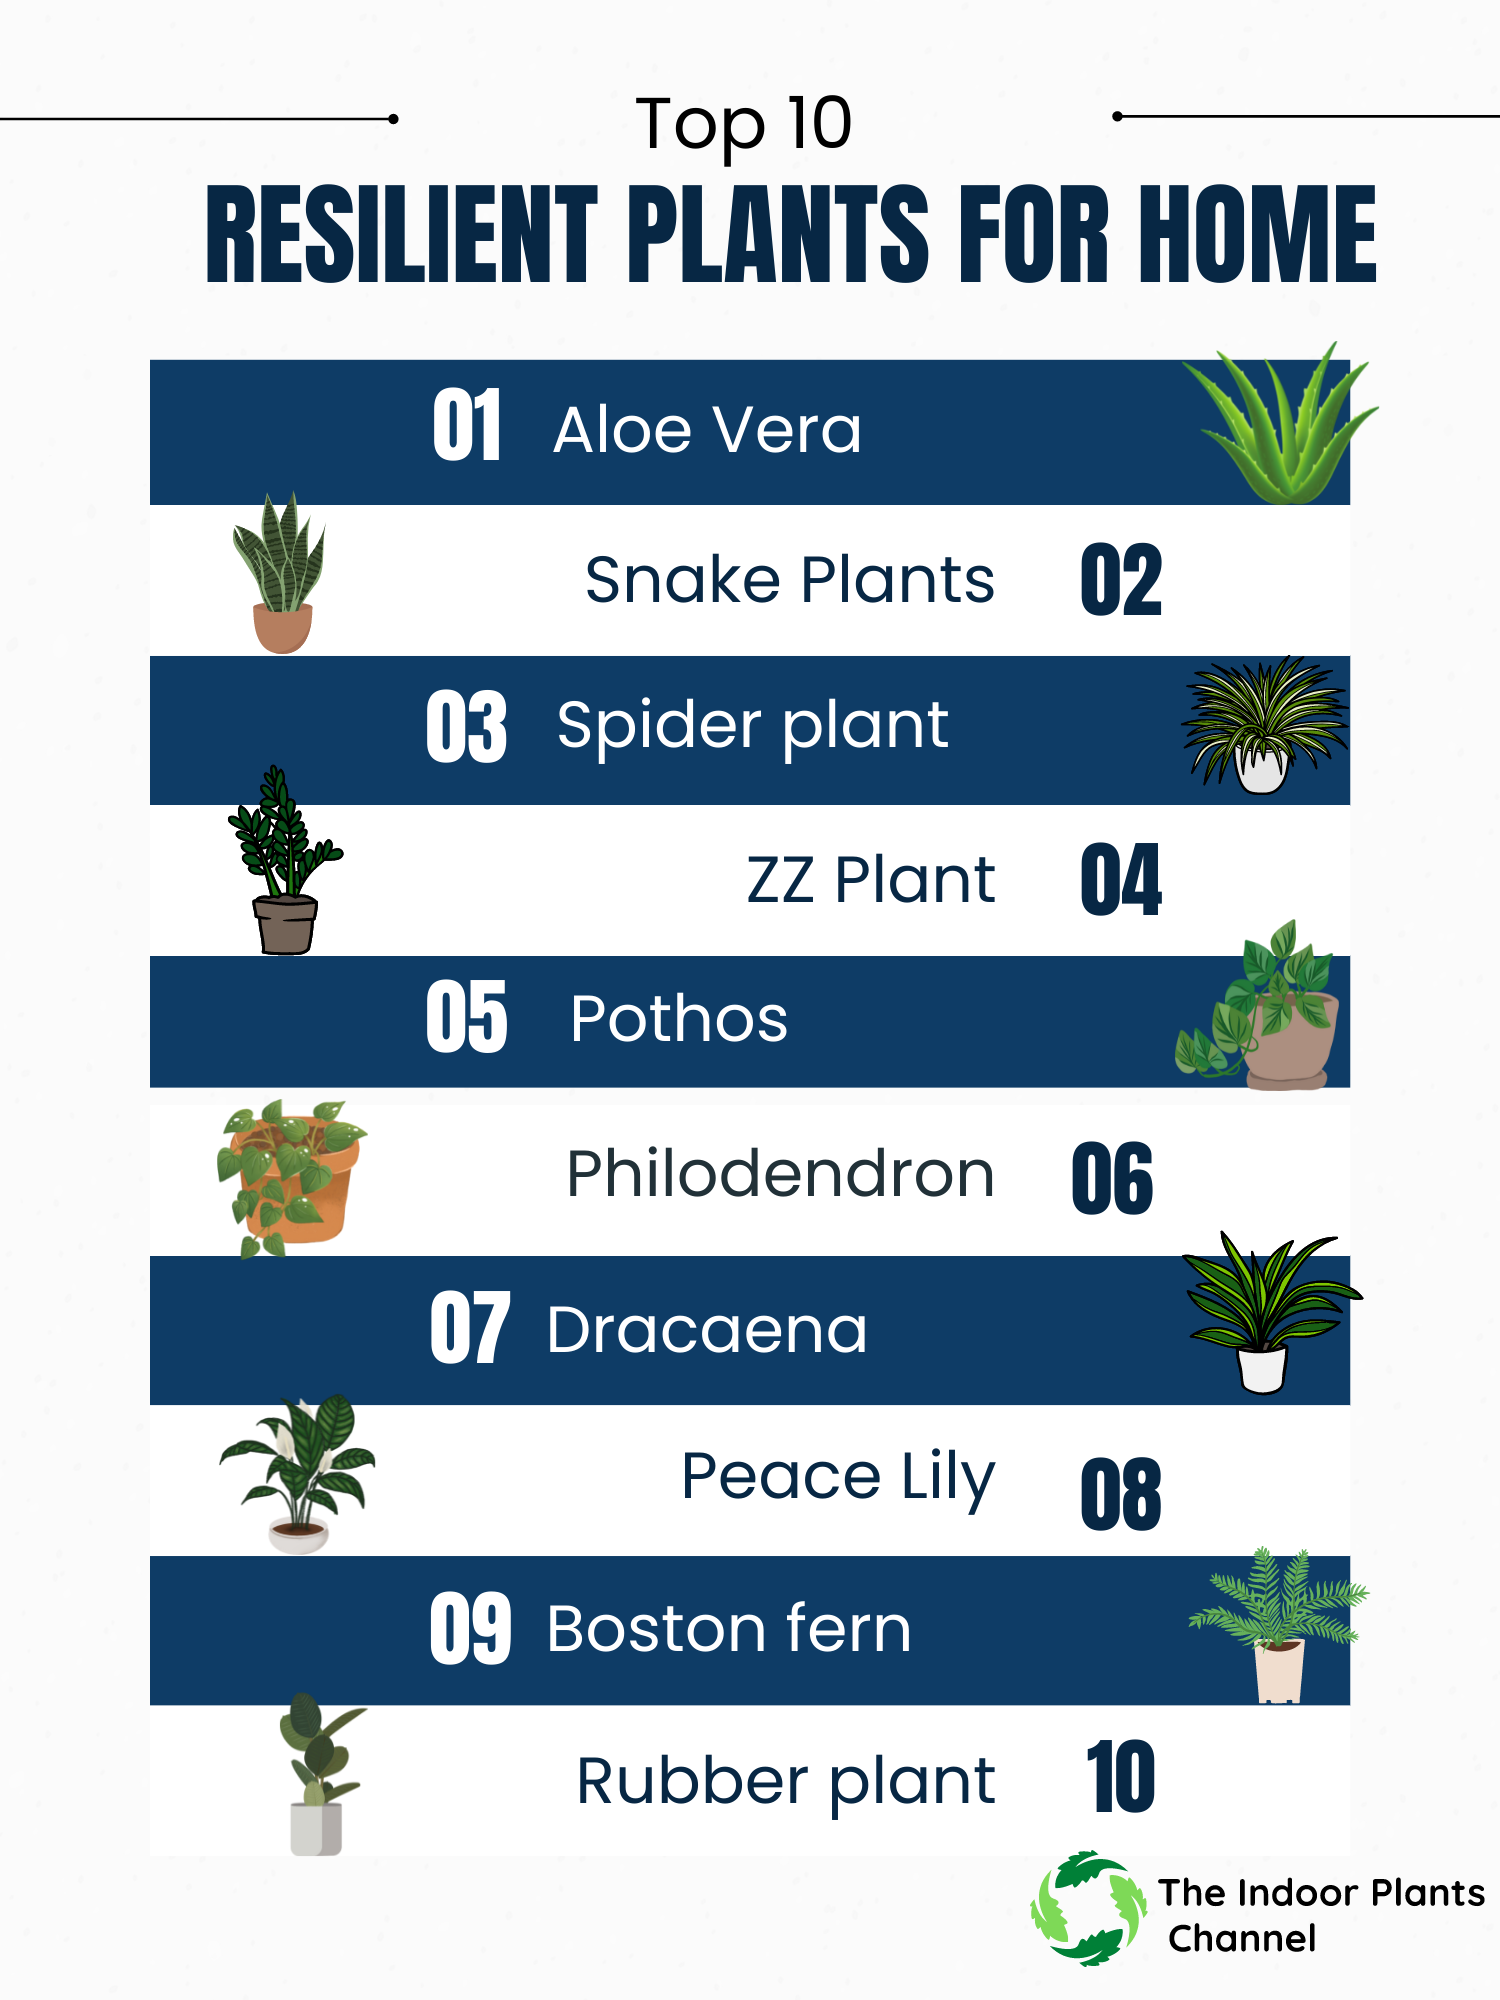 Top 10 Most Resilient Plants for Home